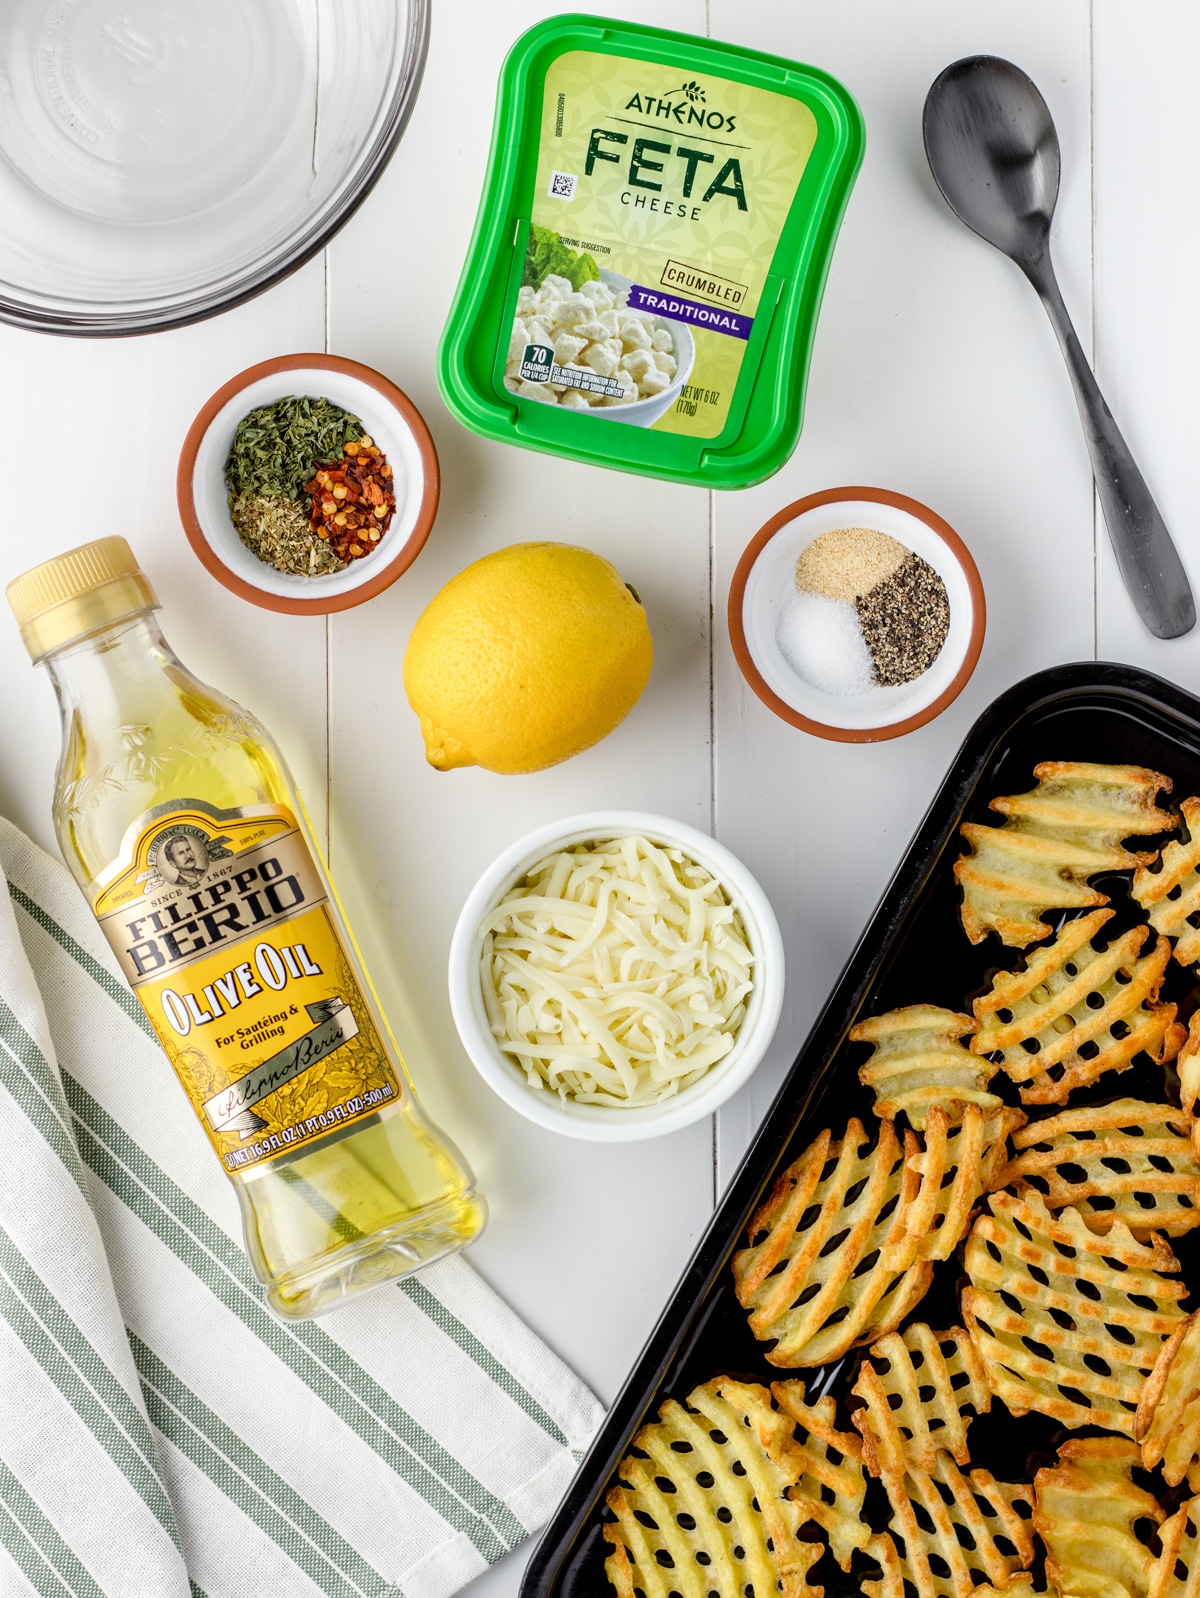 Ingredients needed are waffle fries, olive oil, lemon zest, lemon juice, red pepper flakes, oregano, parsley, garlic powder, salt and pepper, feta cheese, and mozzarella cheese.